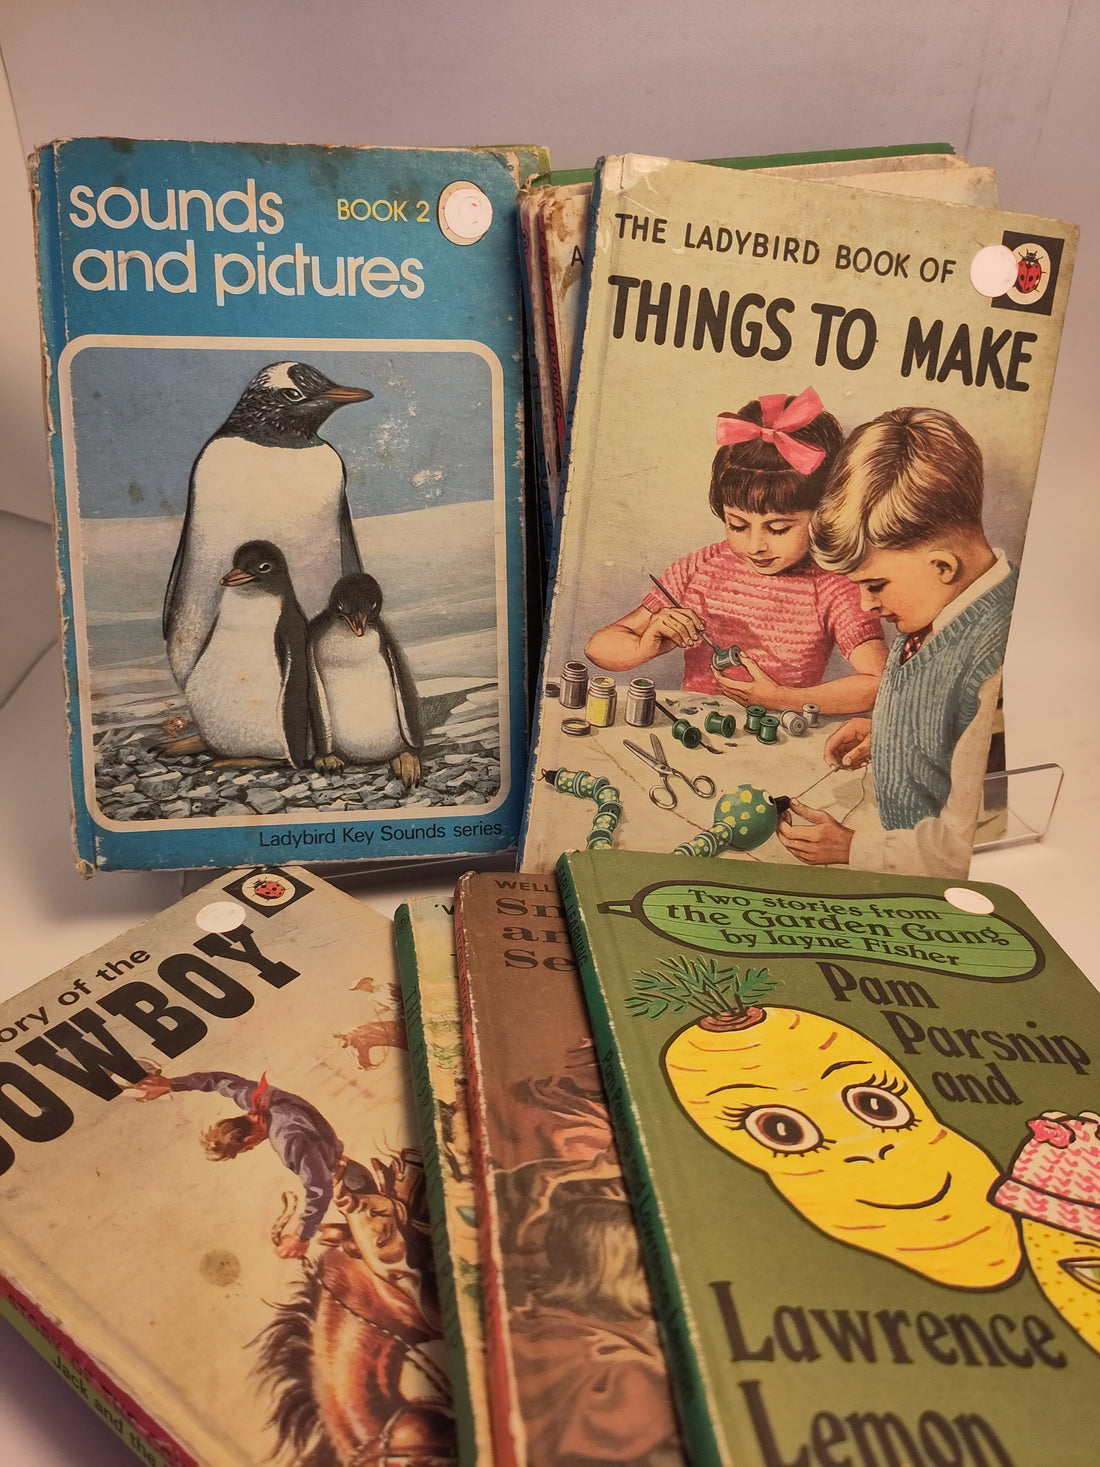 "Things to make" with Ladybird books